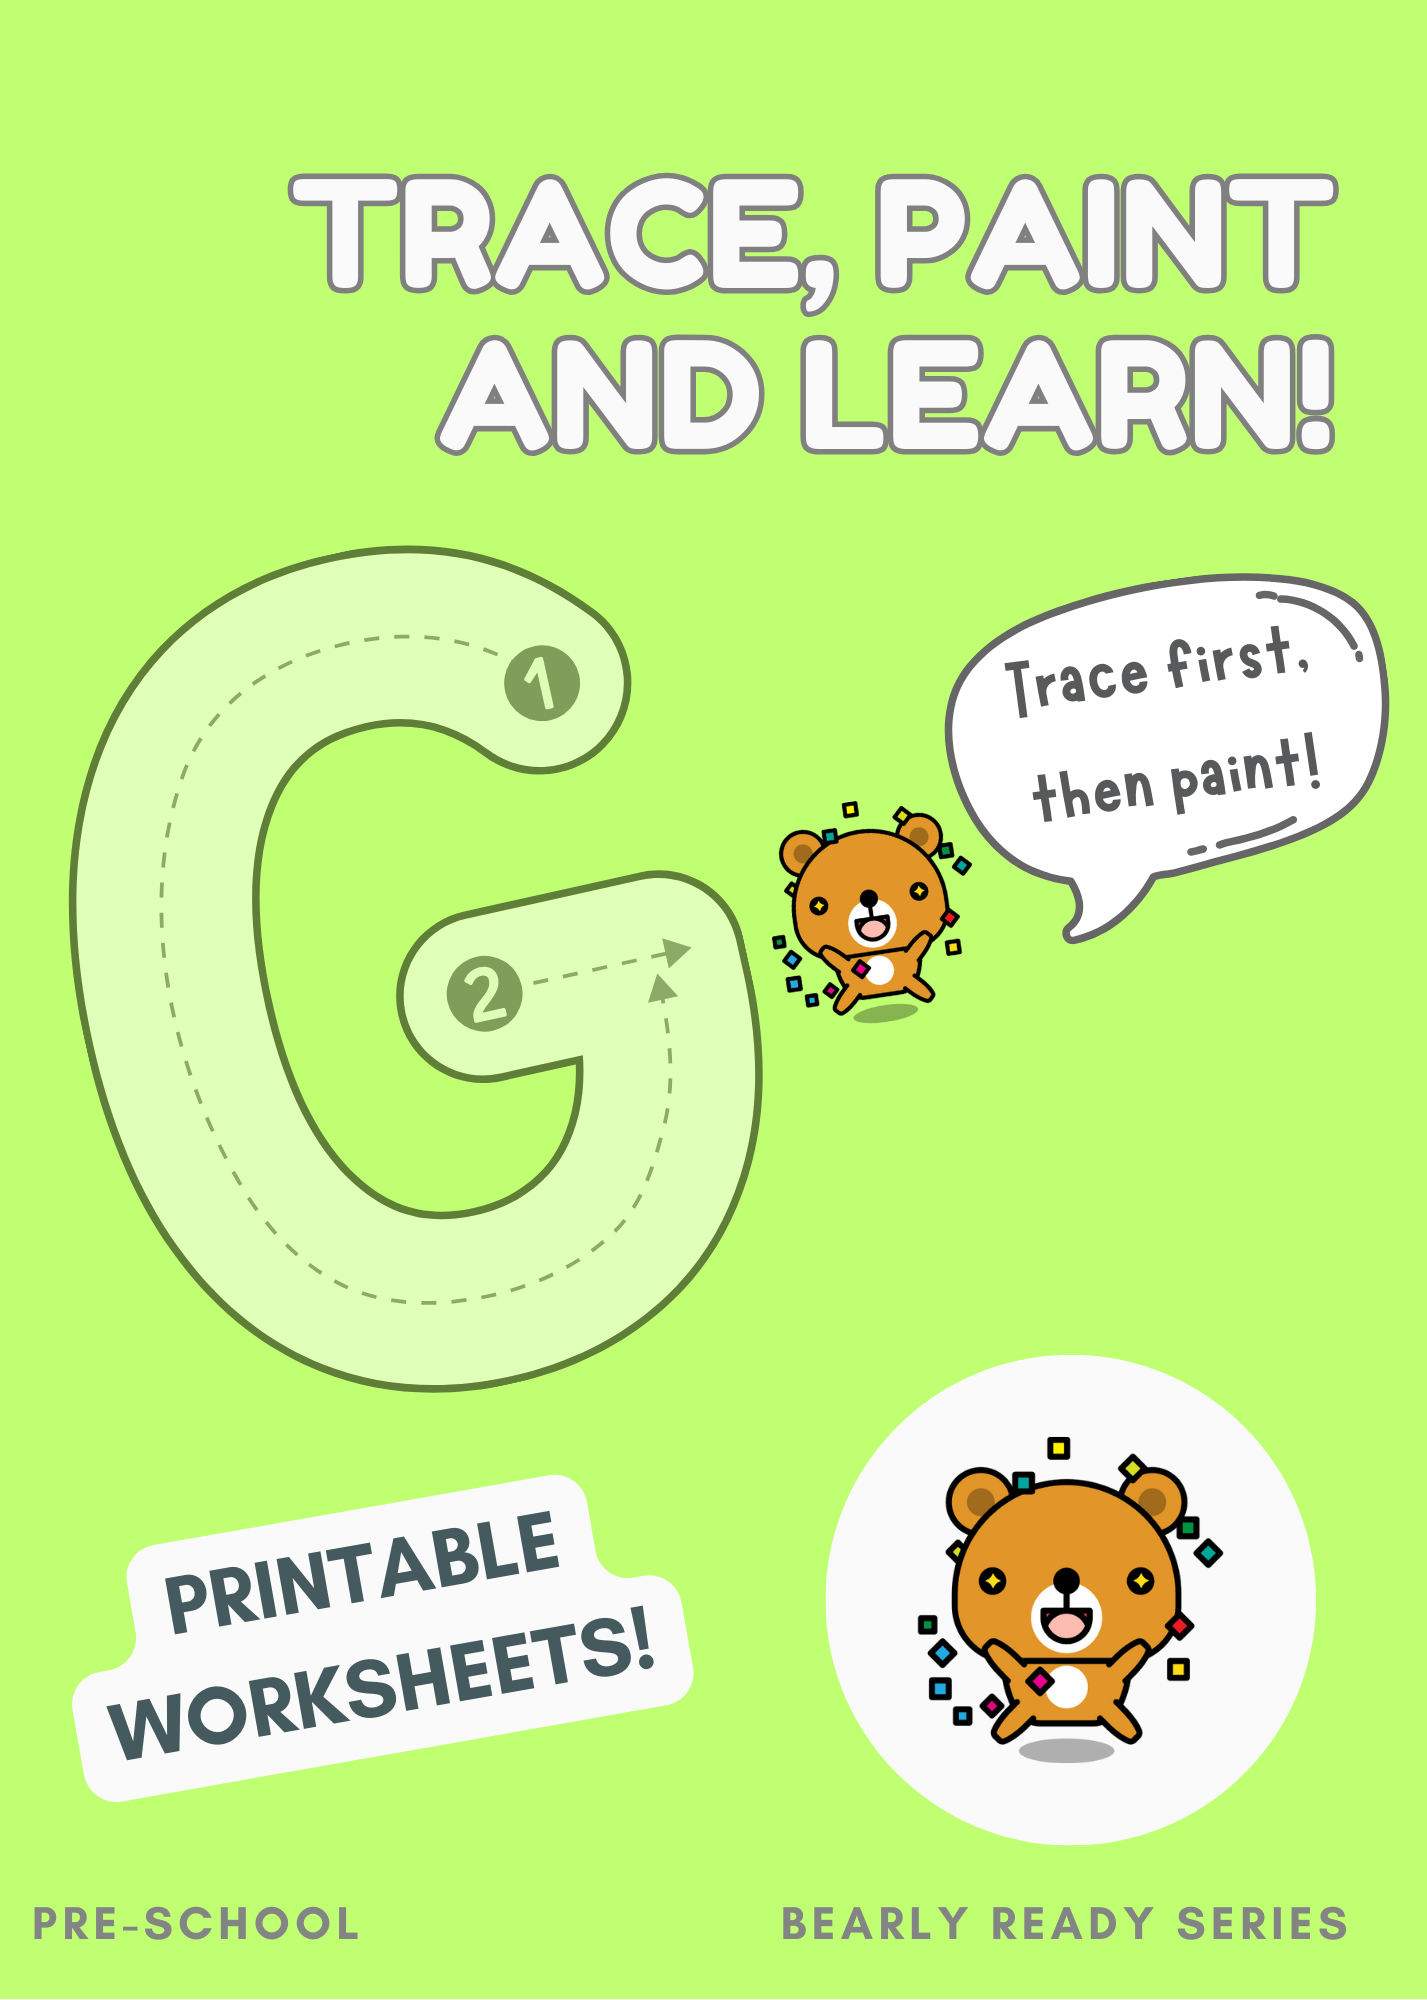 Trace letters, paint and learn - Ultimate letter tracing and painting workbook for pre-schoolers. Printable worksheets.